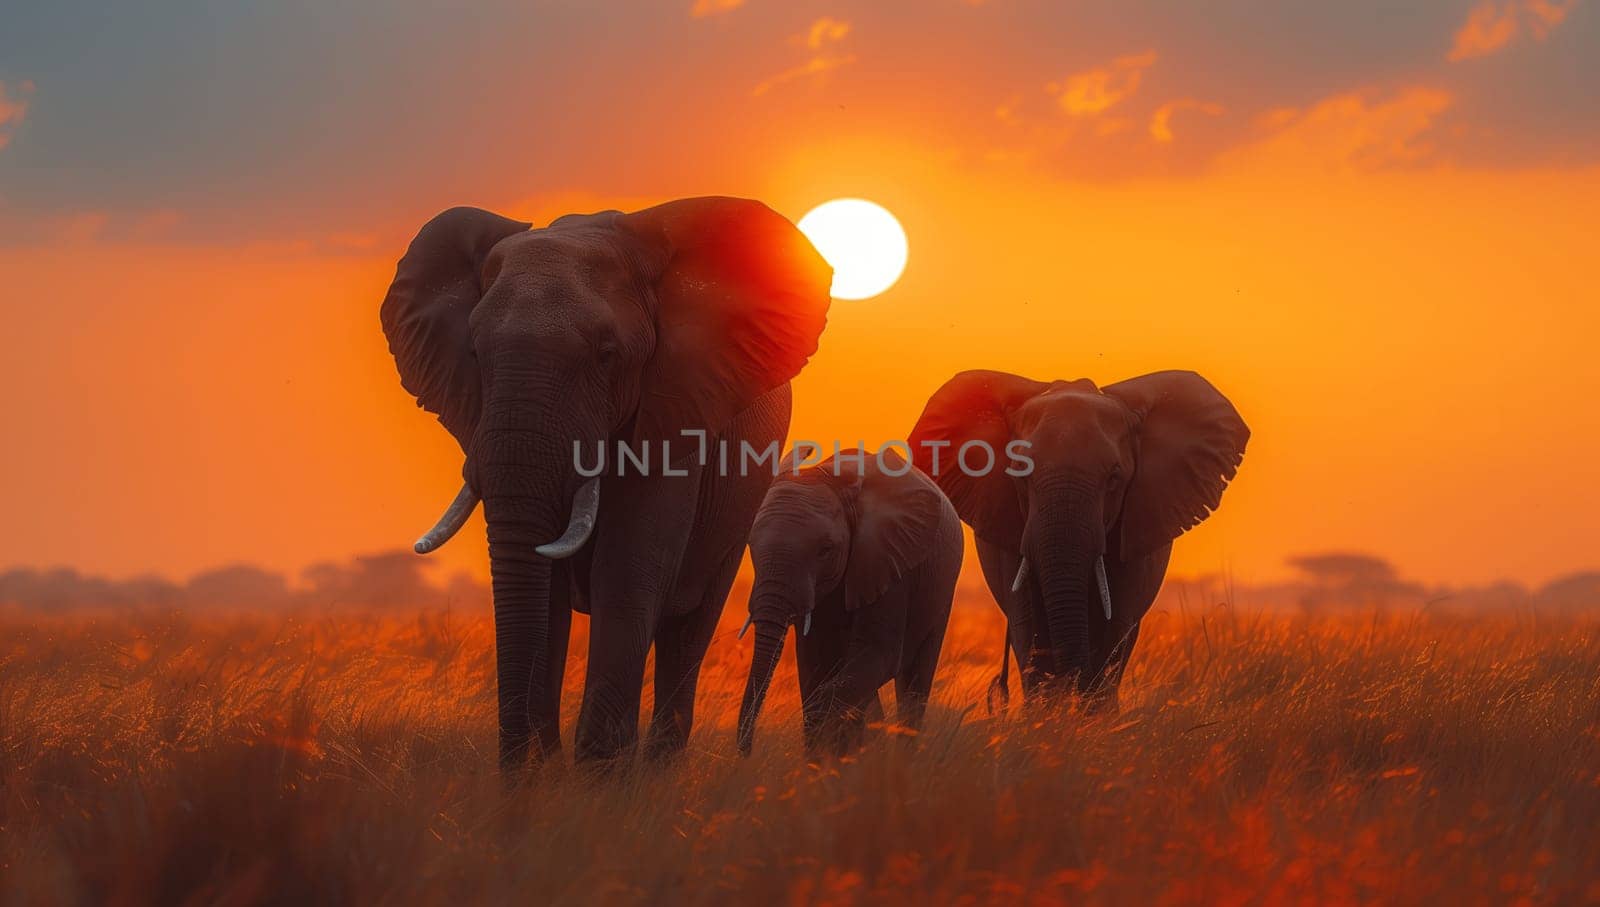 A herd of elephants peacefully standing in a grassy field under the red sky at sunset, creating a mesmerizing natural landscape